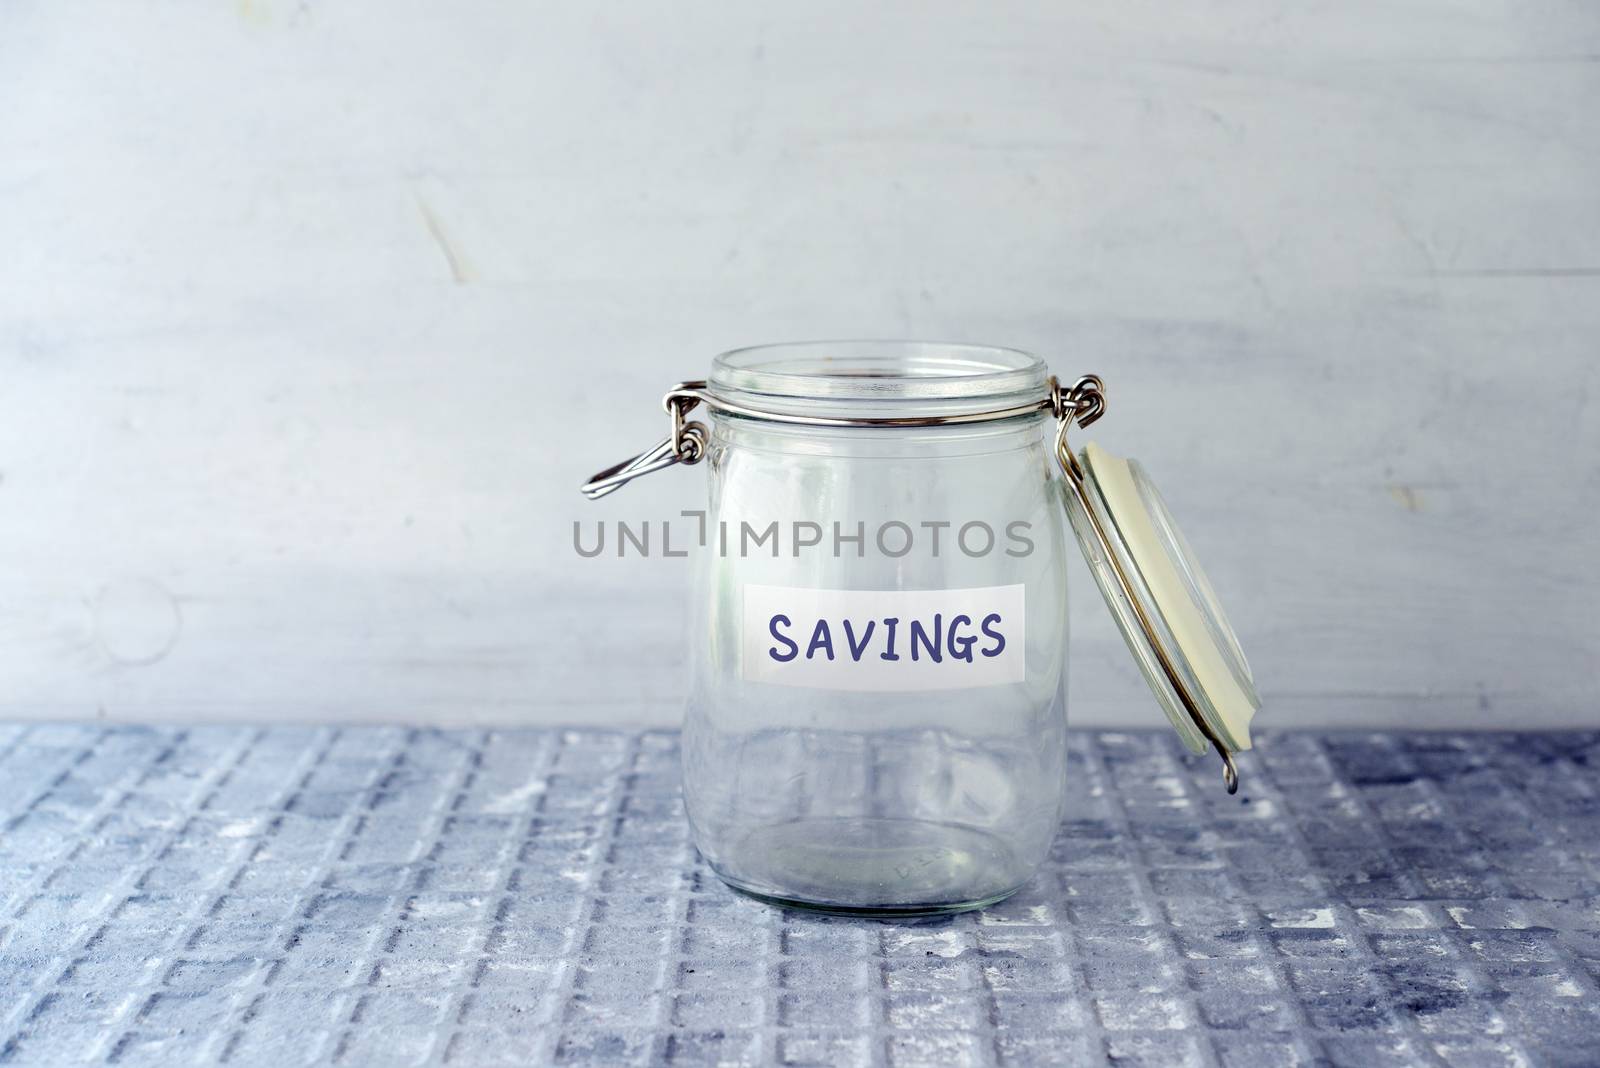 Empty glass money jar with savings label, financial concept.